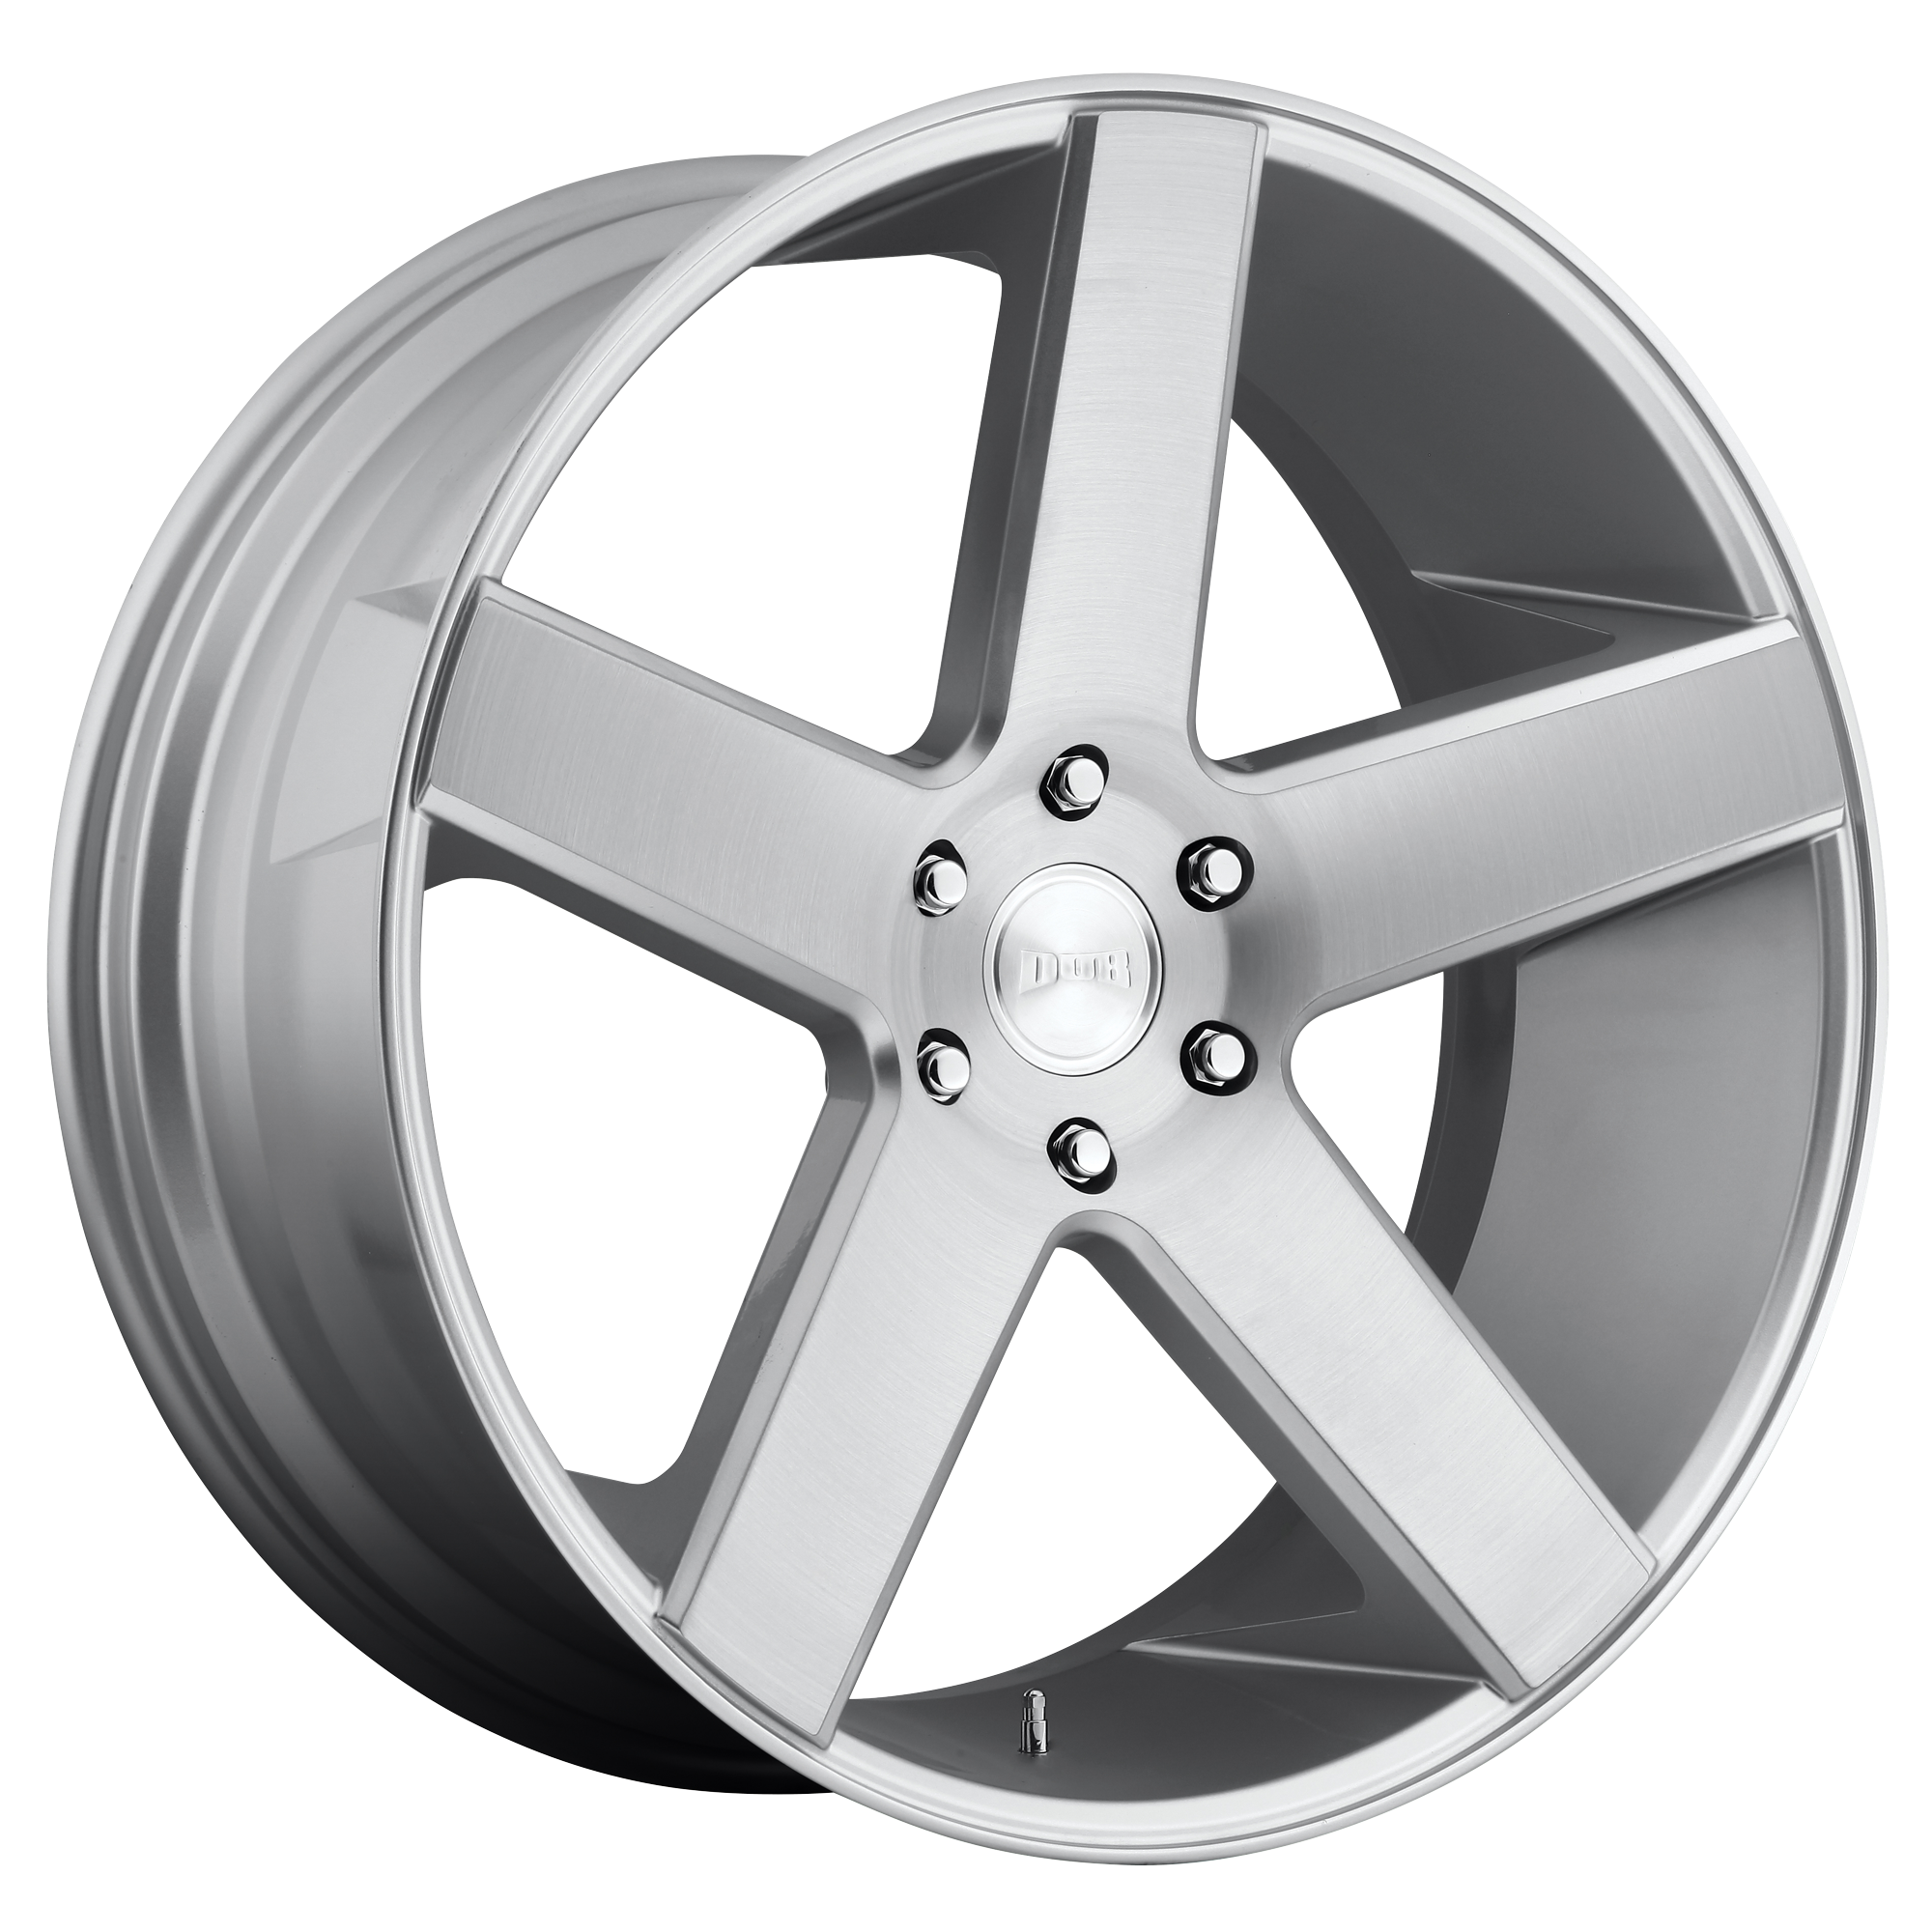 BALLER 22x9.5 6x139.70 GLOSS SILVER BRUSHED (31 mm) - Tires and Engine Performance